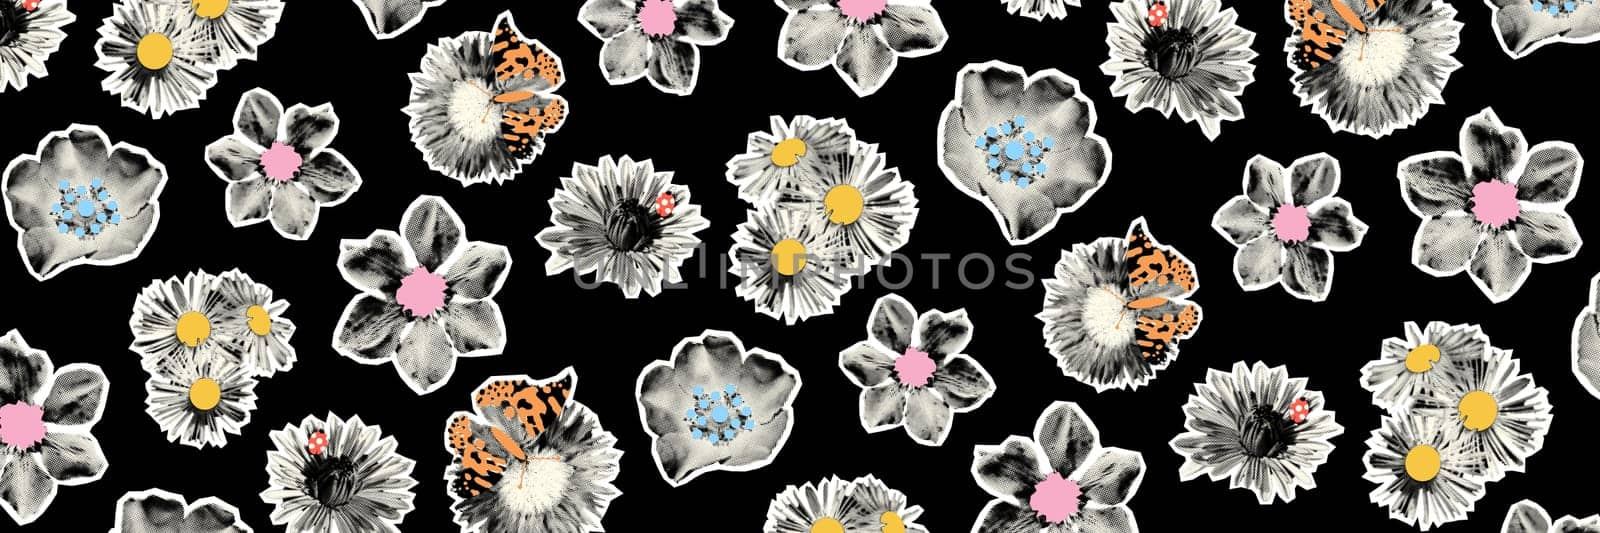 Wild flowers halftone collage banner with doodles by ugguggu